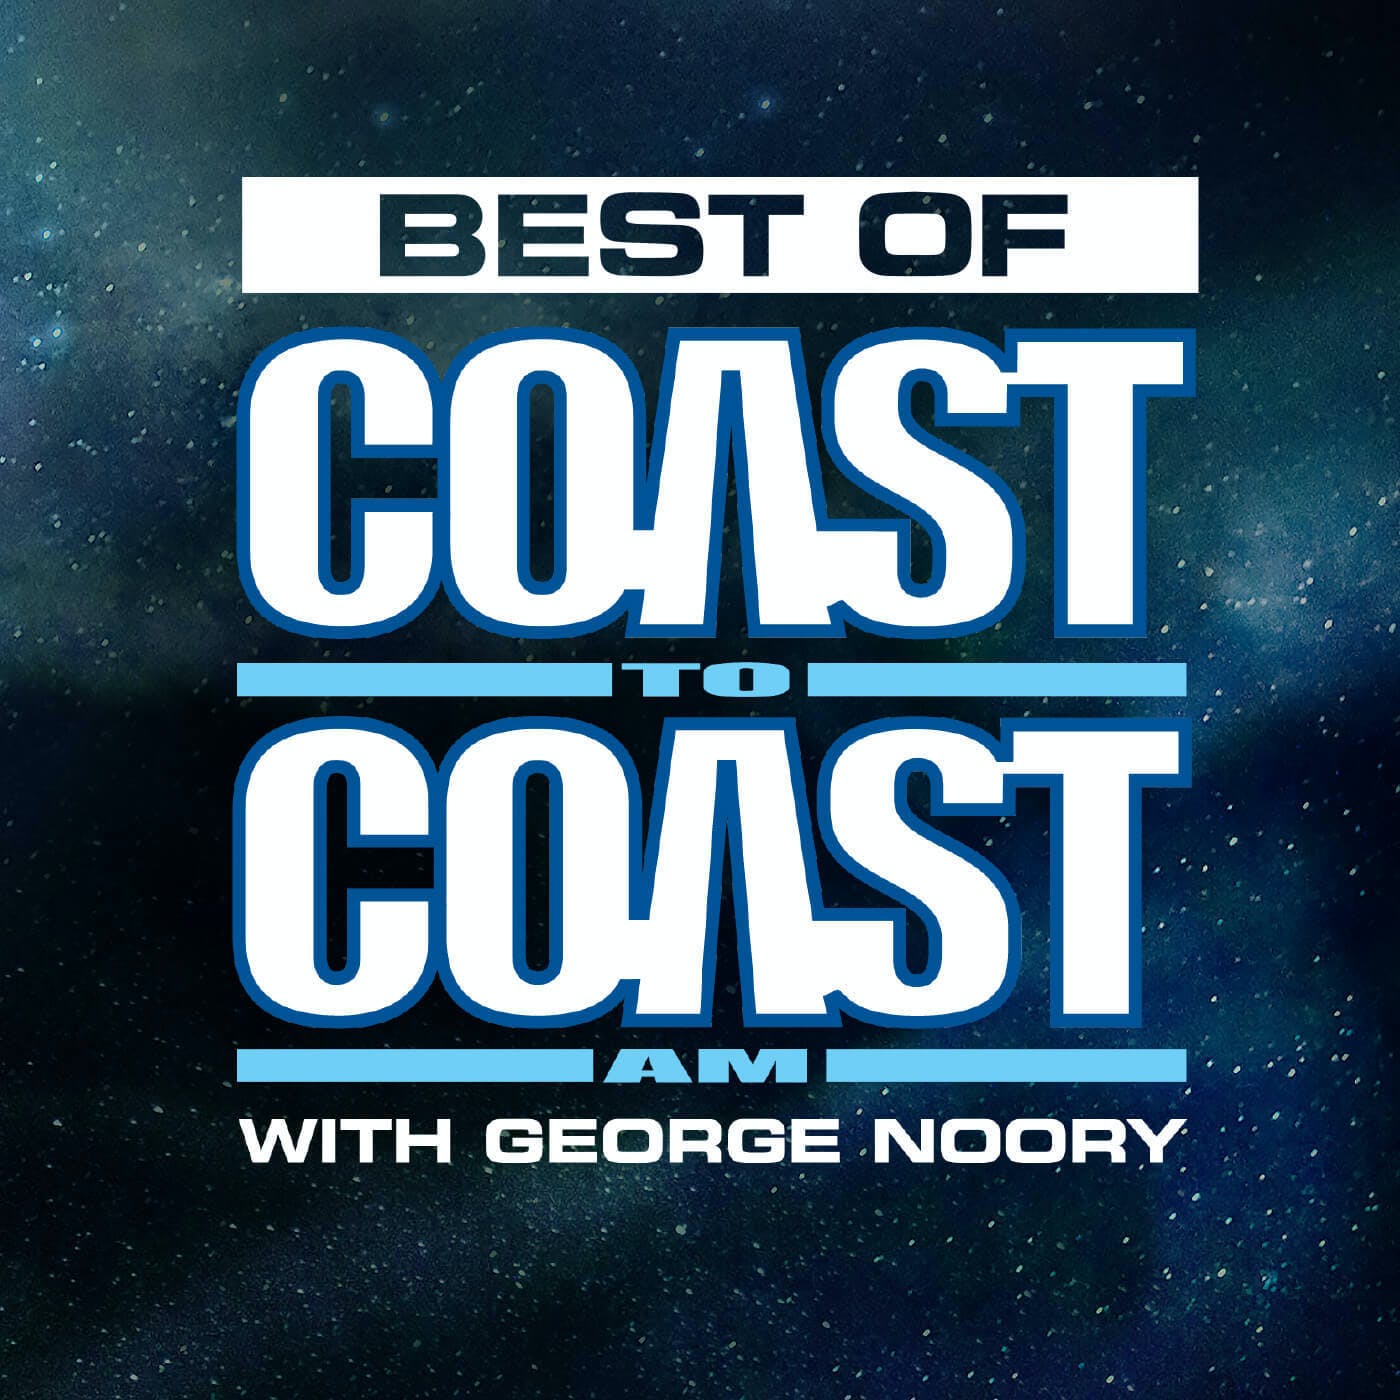 Paranormal Research - Best of Coast to Coast AM - 5/3/19